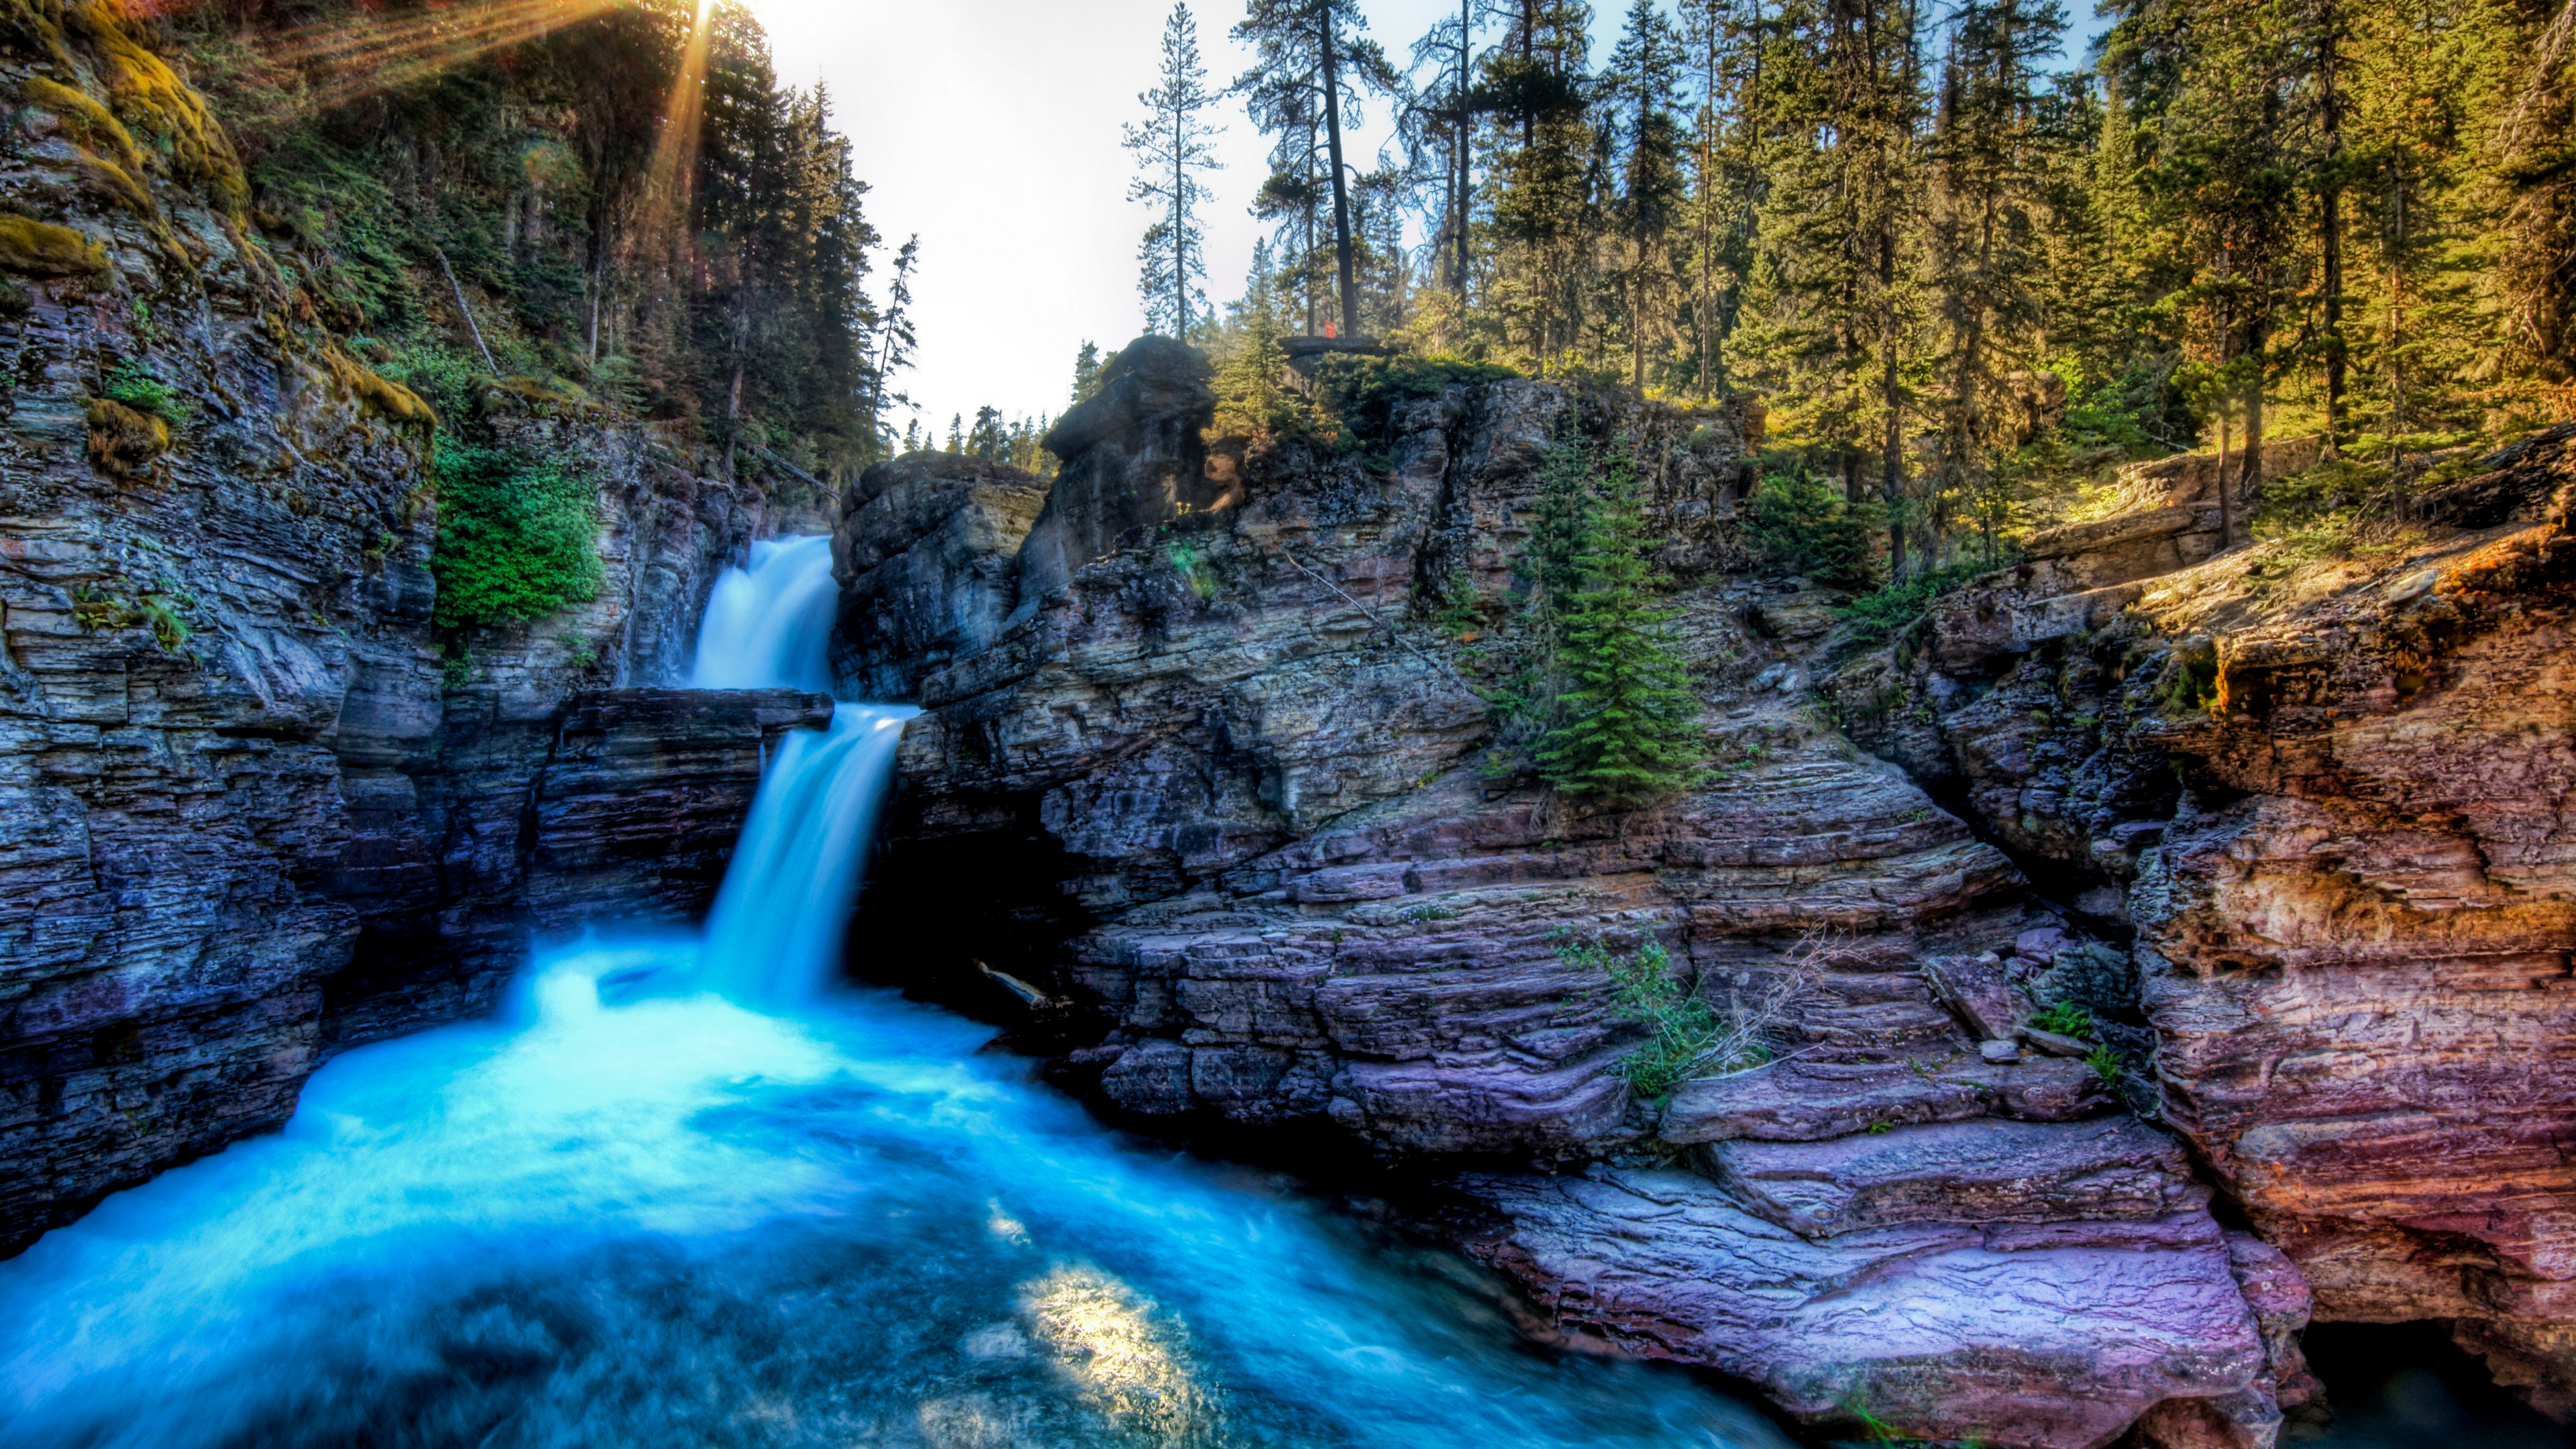 General 3840x2160 Trey Ratcliff photography water waterfall trees nature